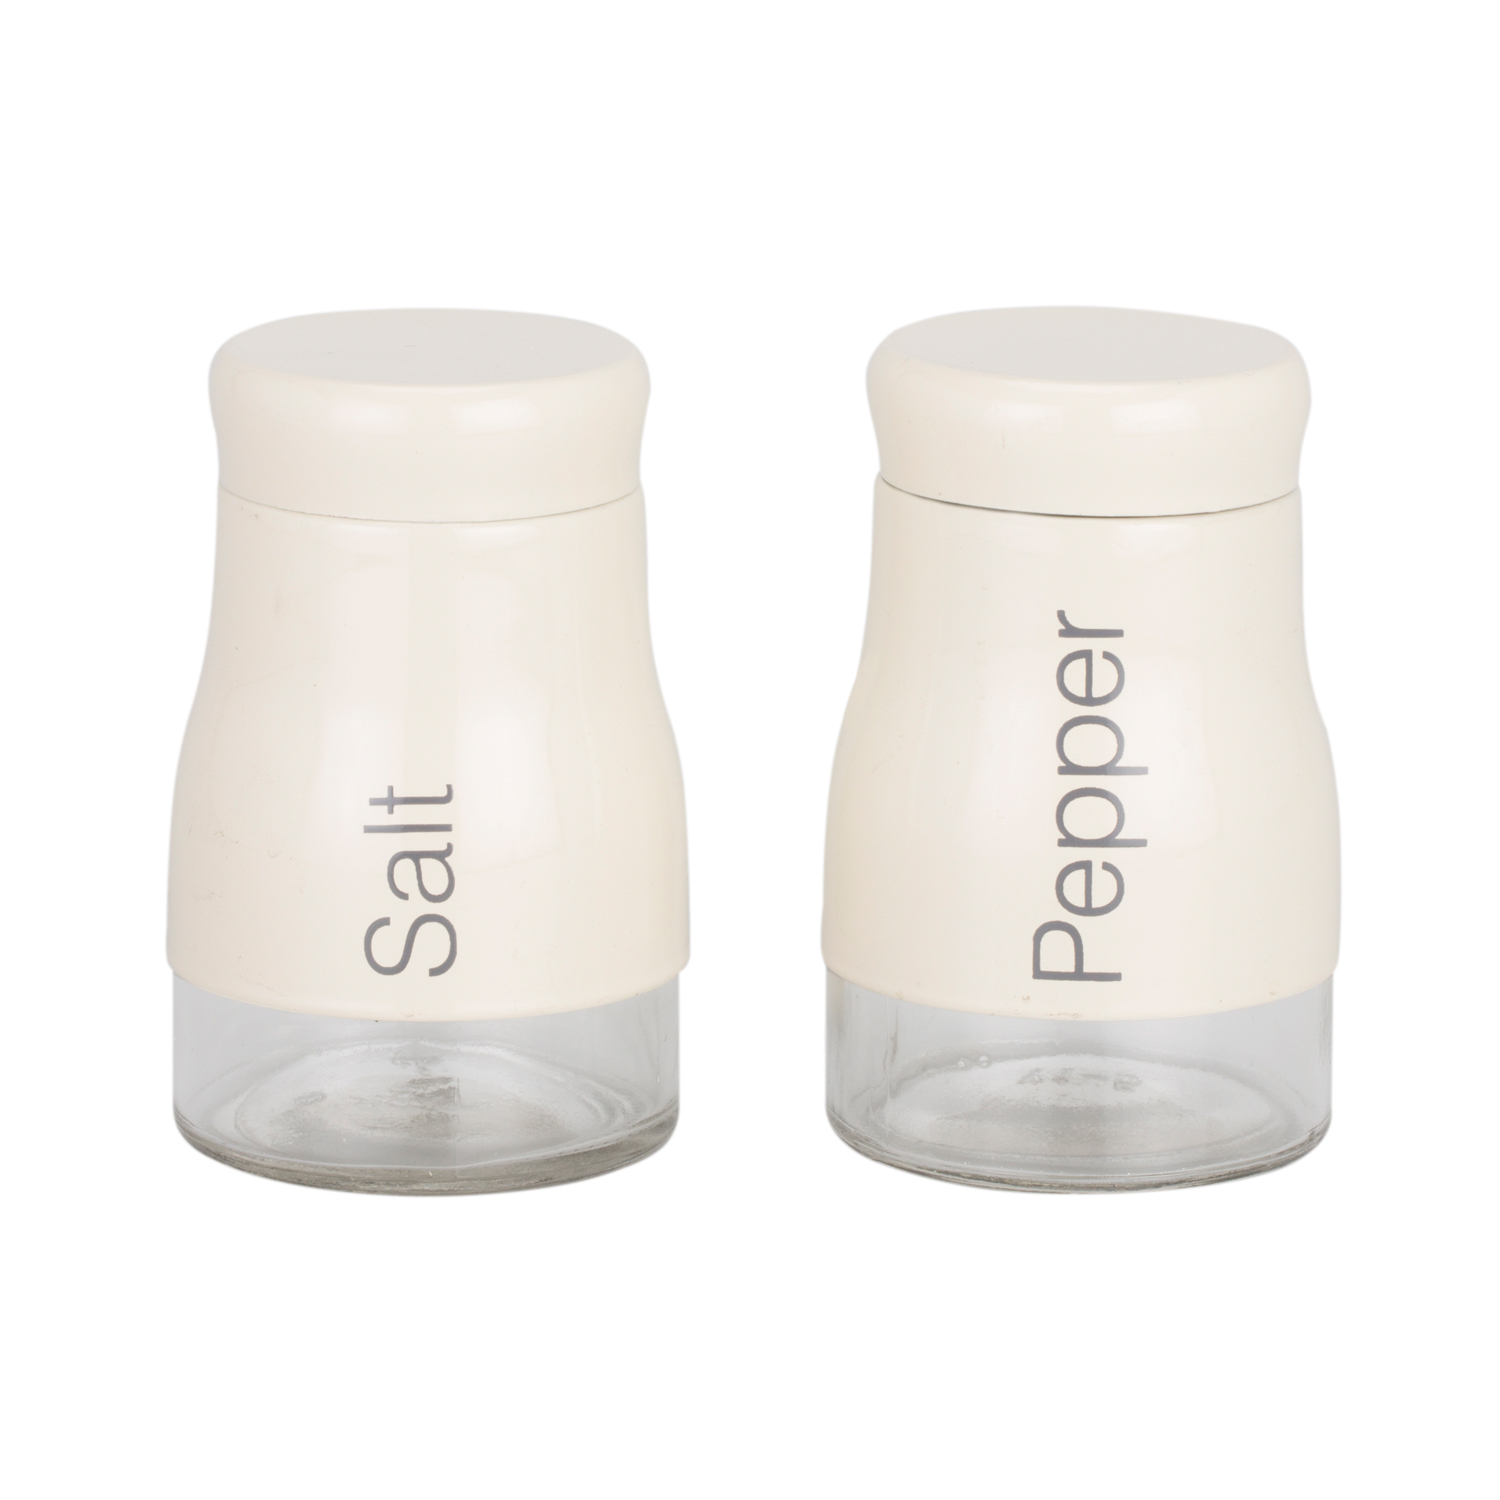 Stainless Steel and Glass Salt & Pepper Set - Cream Image